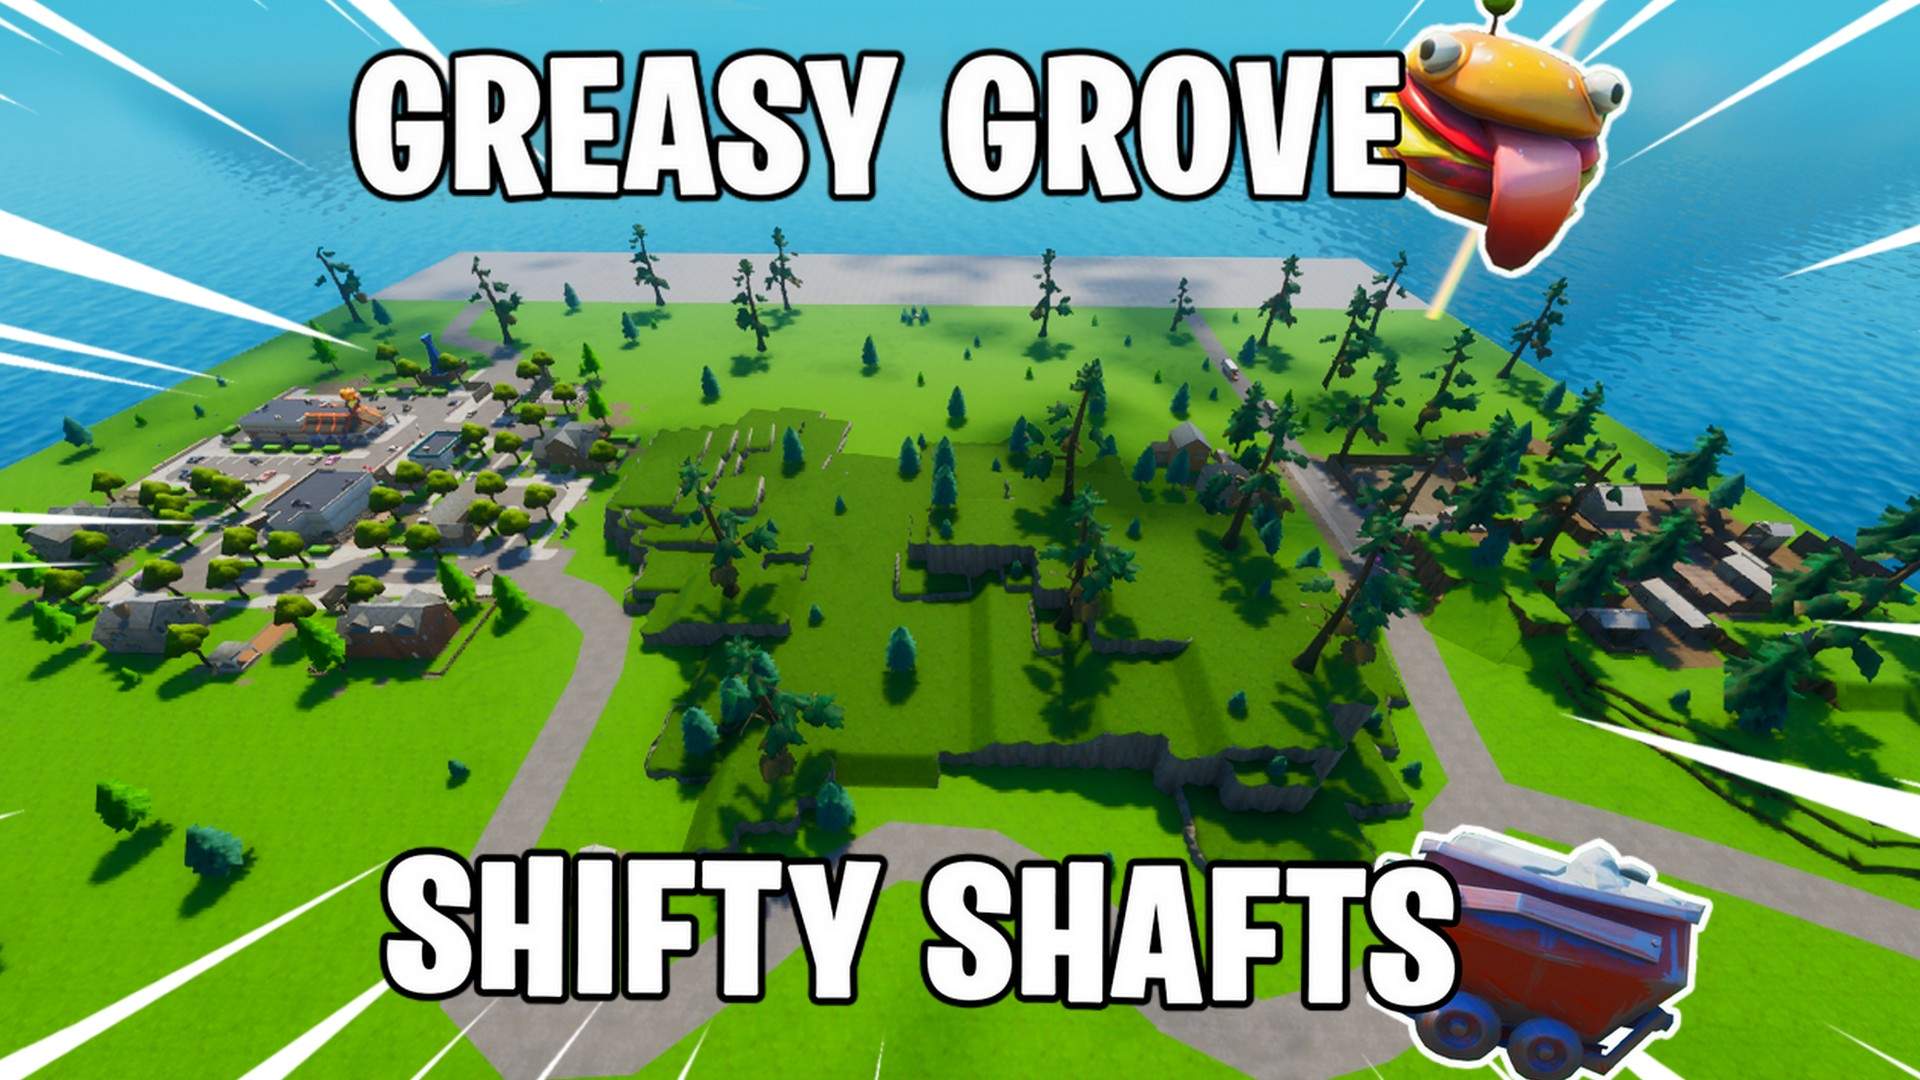 GREASY GROVE AND SHIFTY SHAFTS